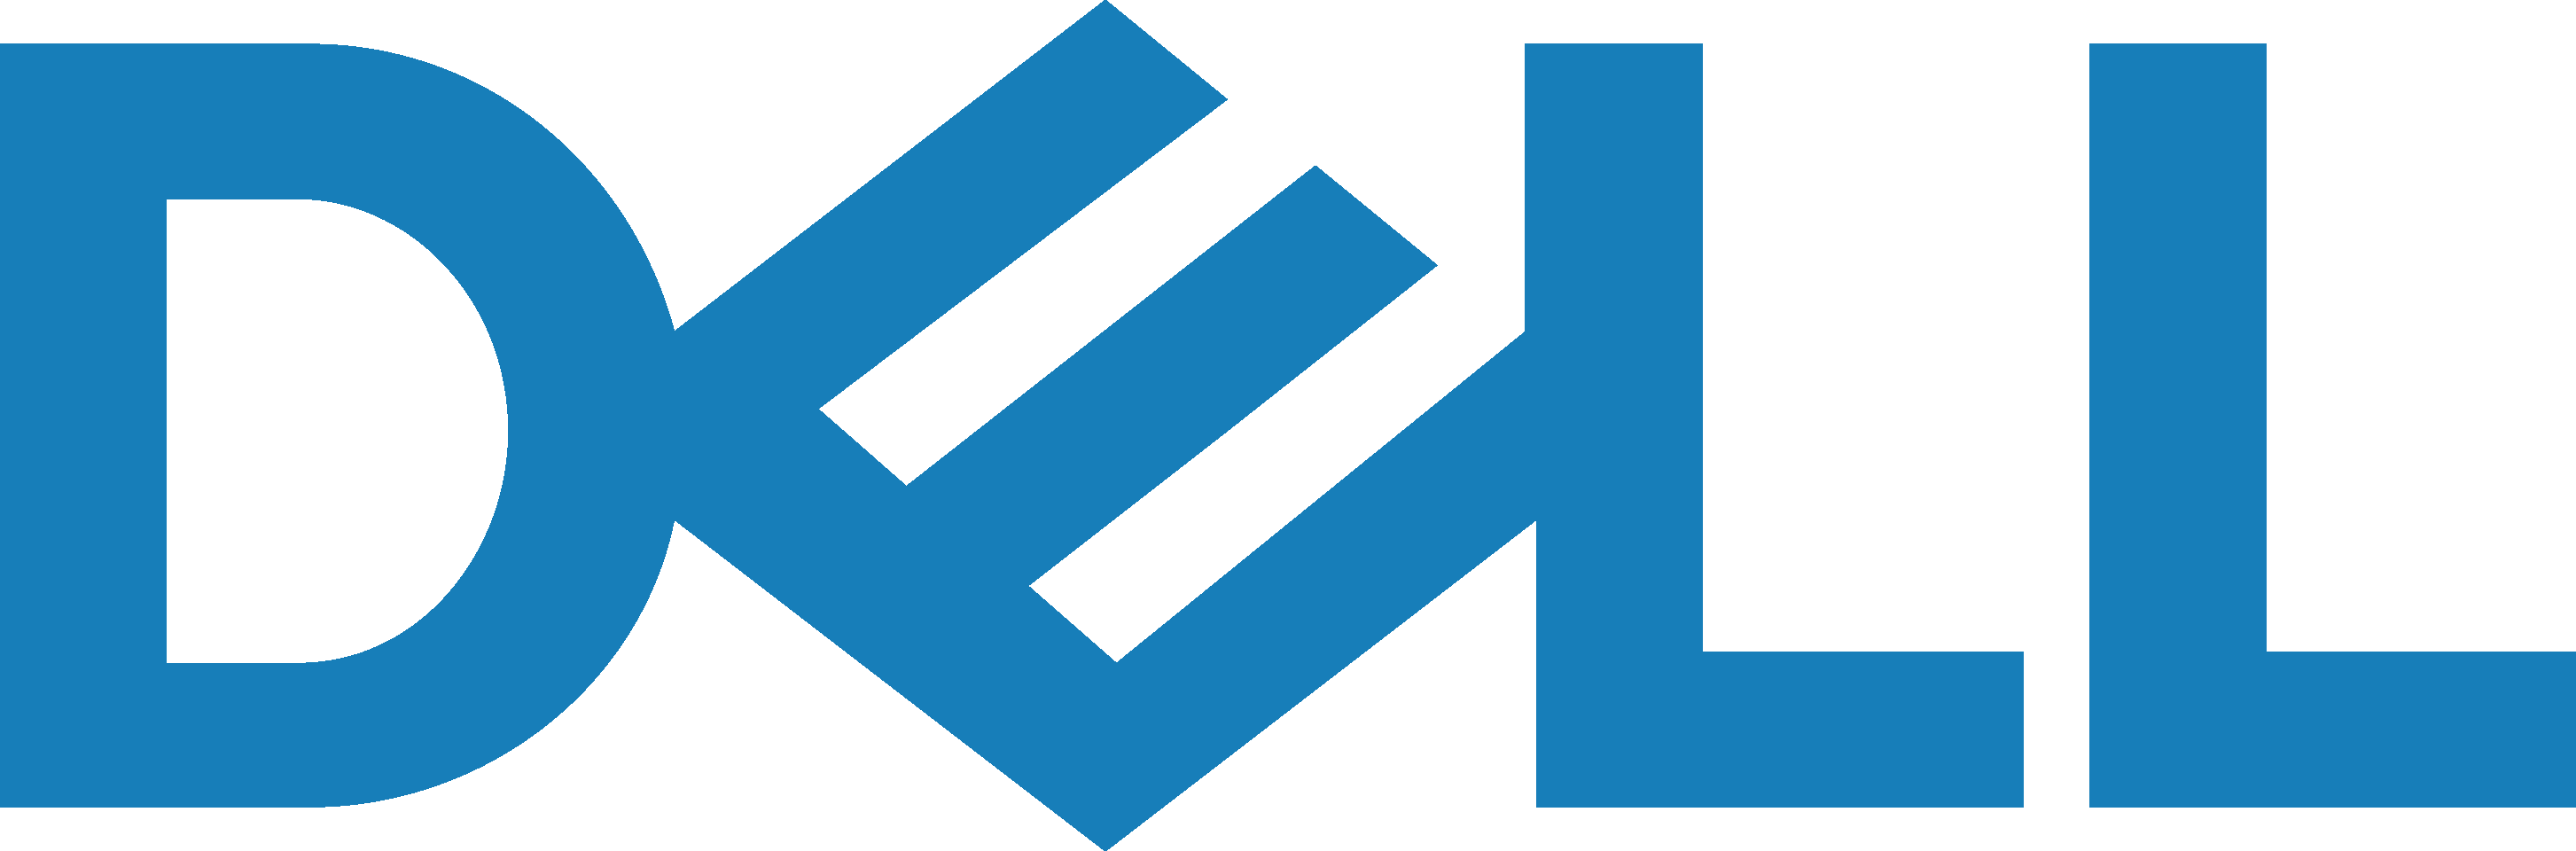 dell-logo-png-14